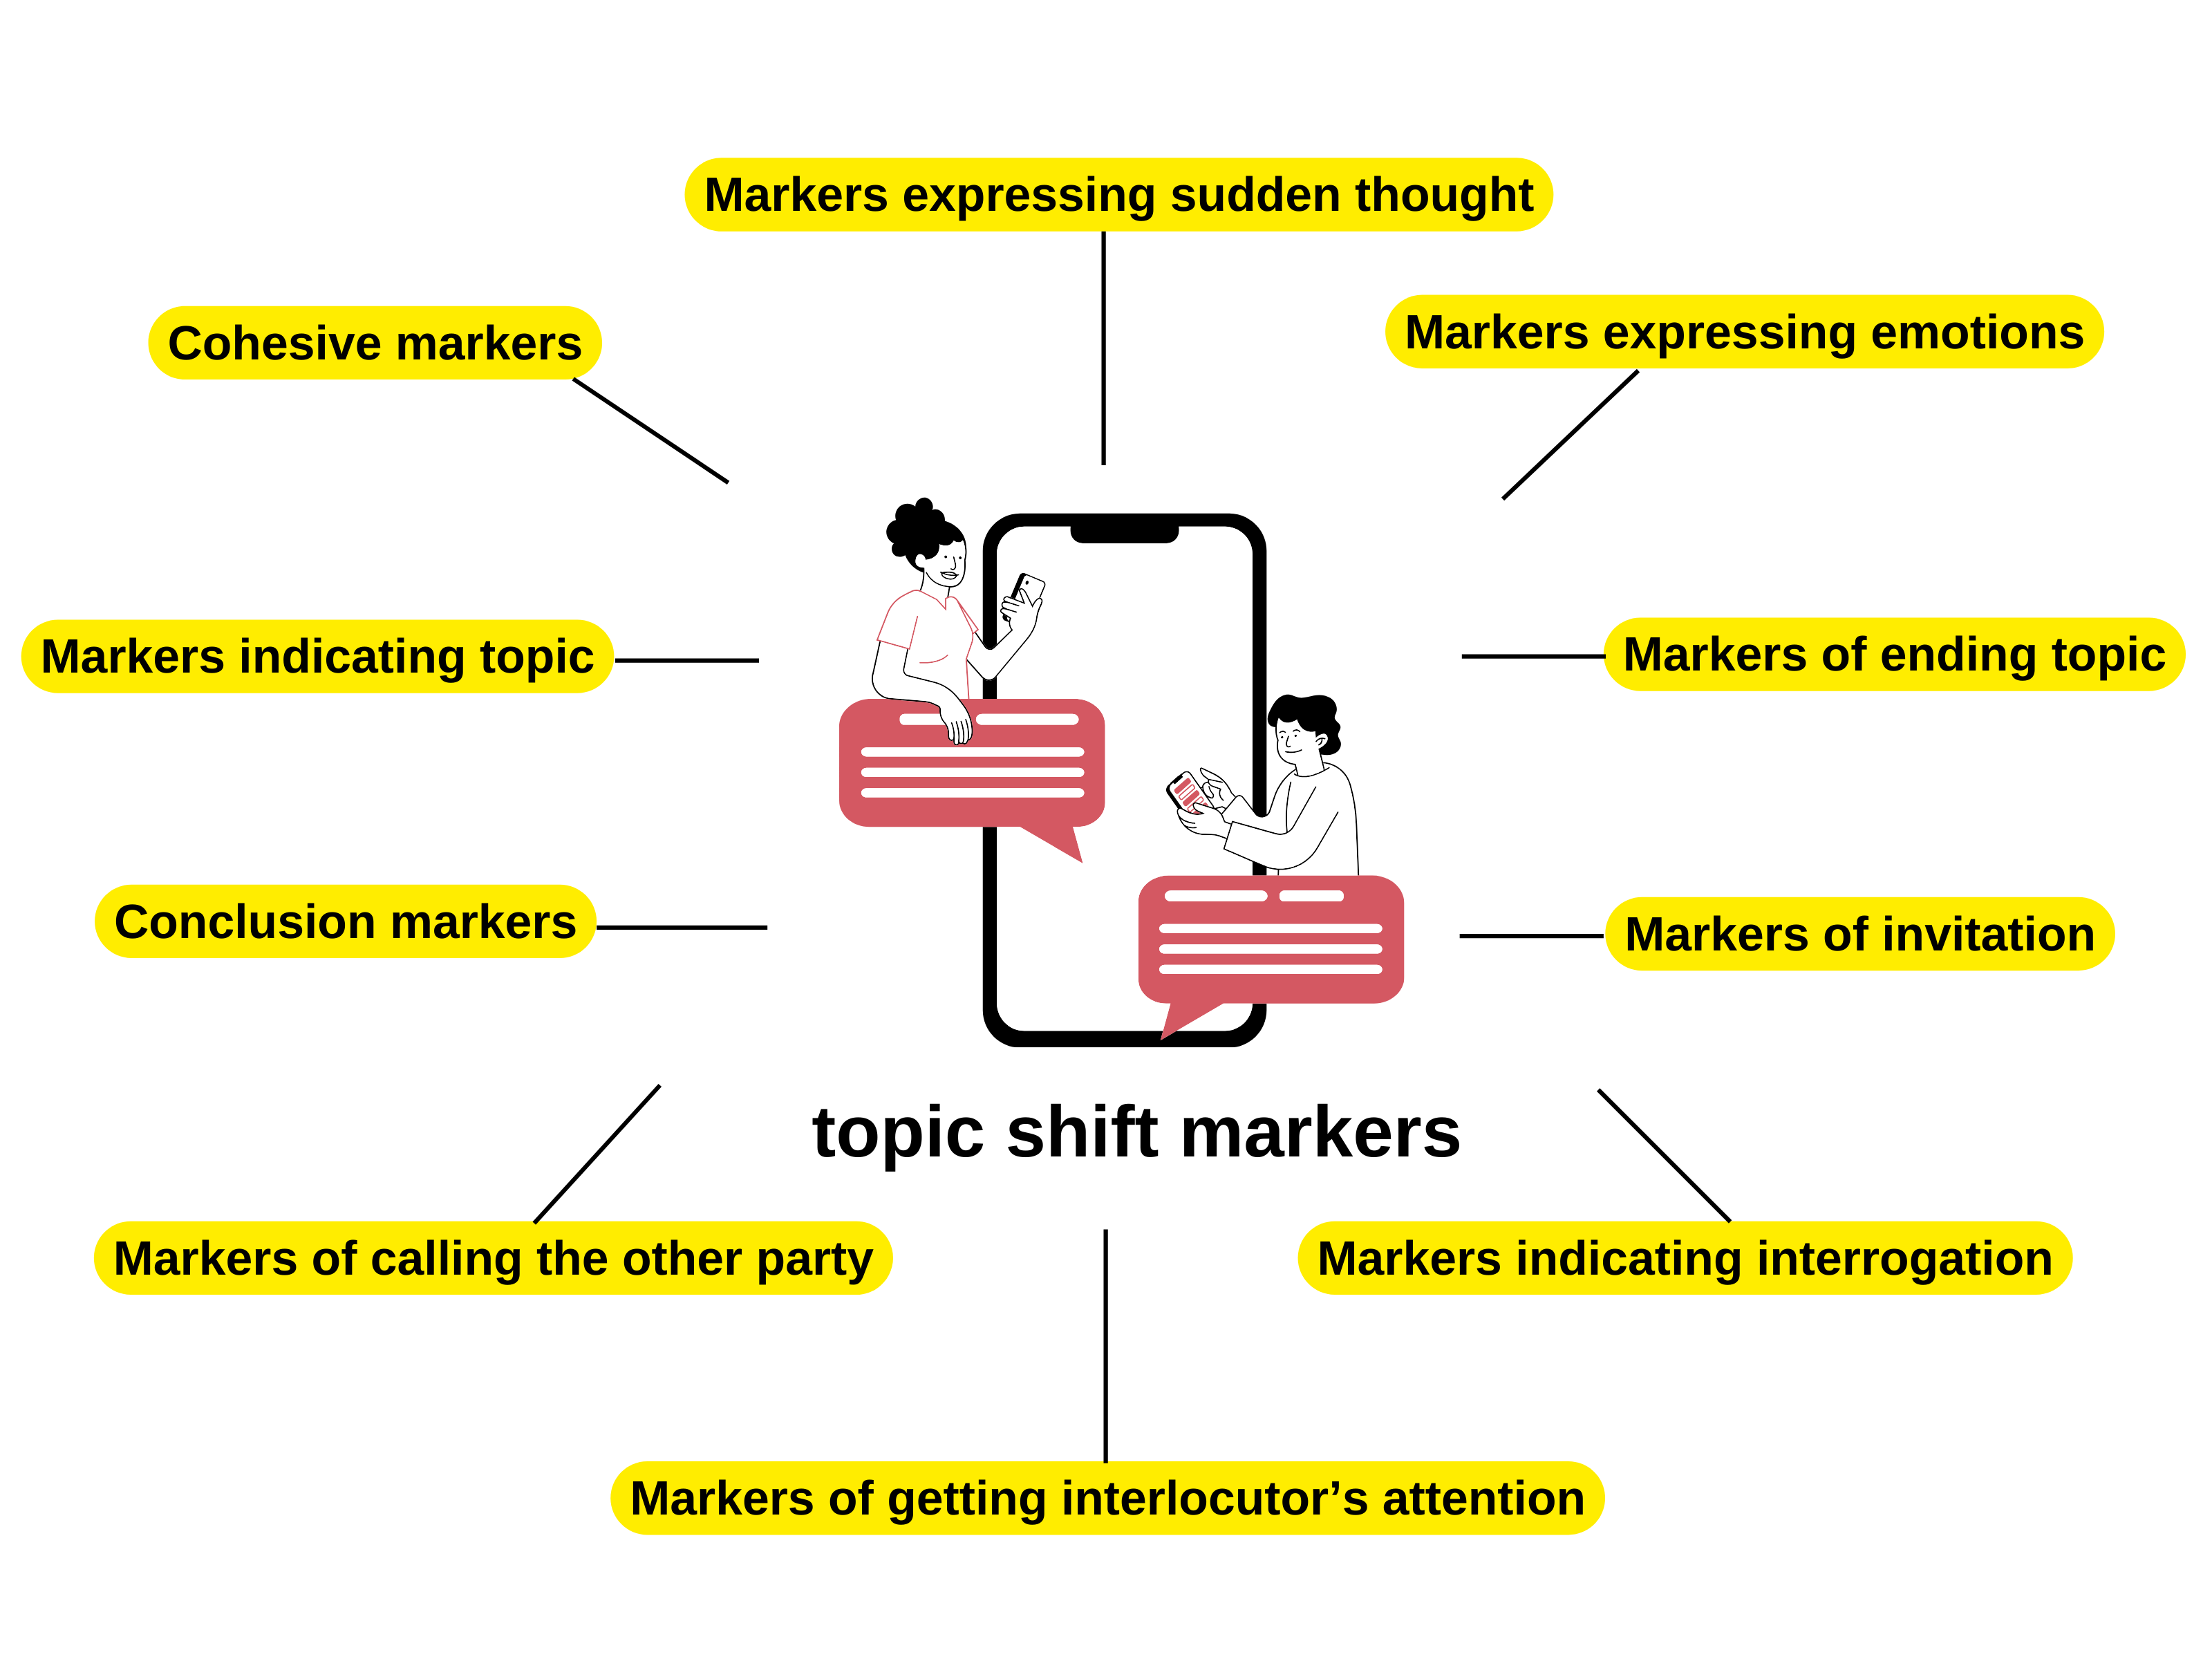 Types and Roles of Topic Shift Markers in Non Face-to-Face Conversation in Thai